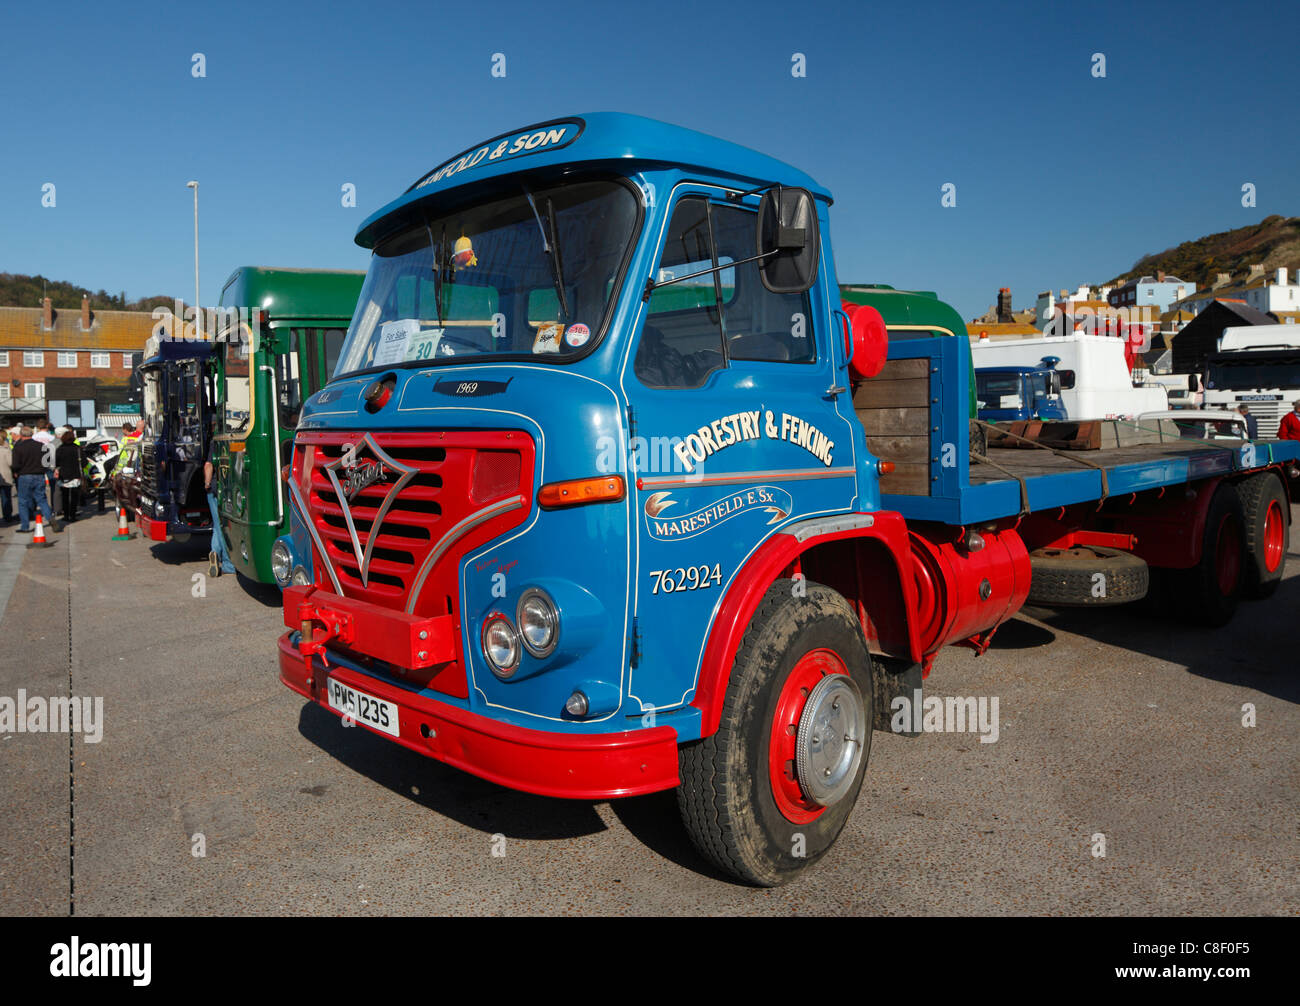 Foden S36 flatbed truck. Stock Photo